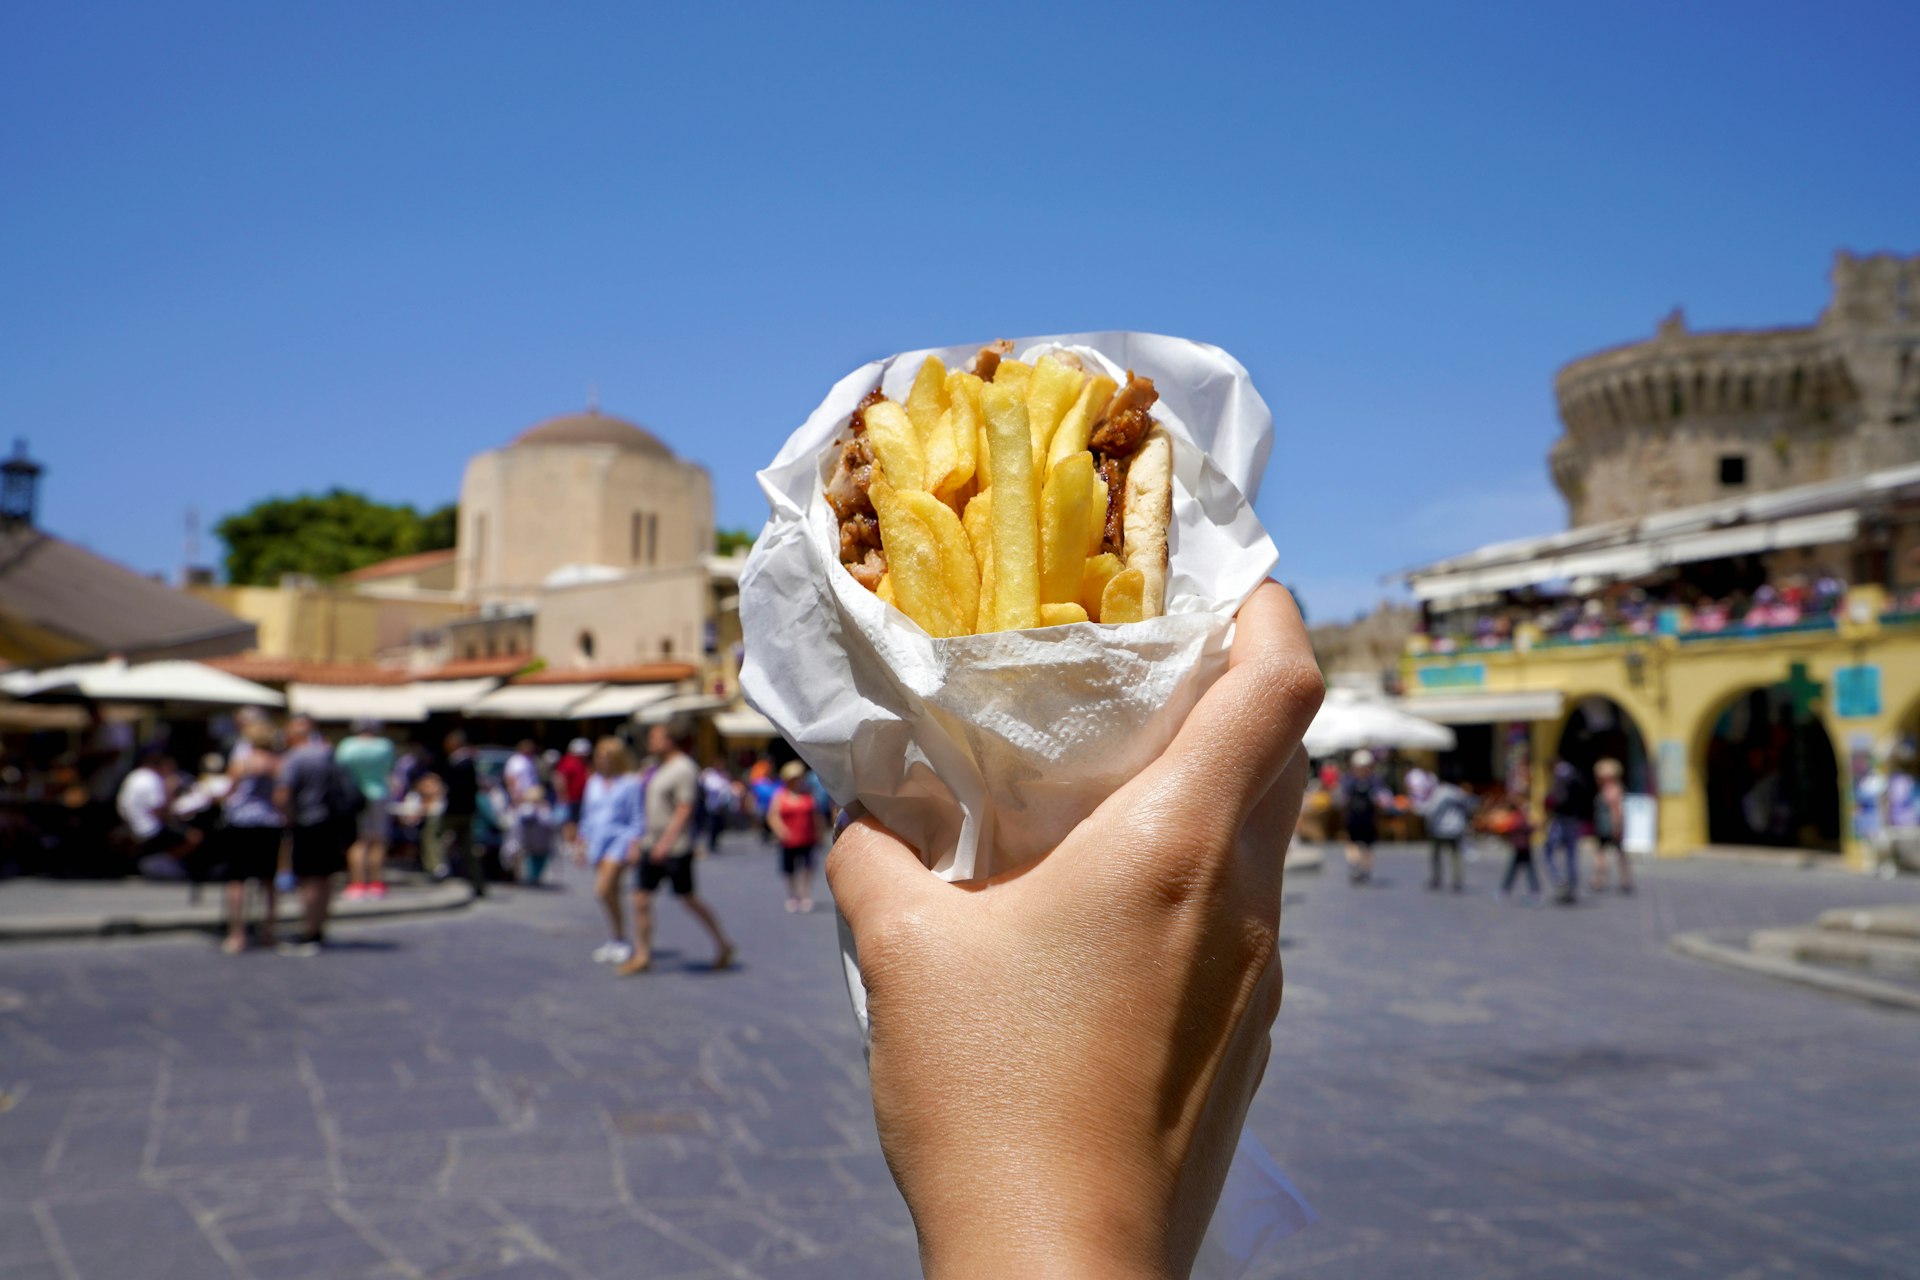 Greek gyros wrapped in pita bread and held up against the background of a Greek old city square